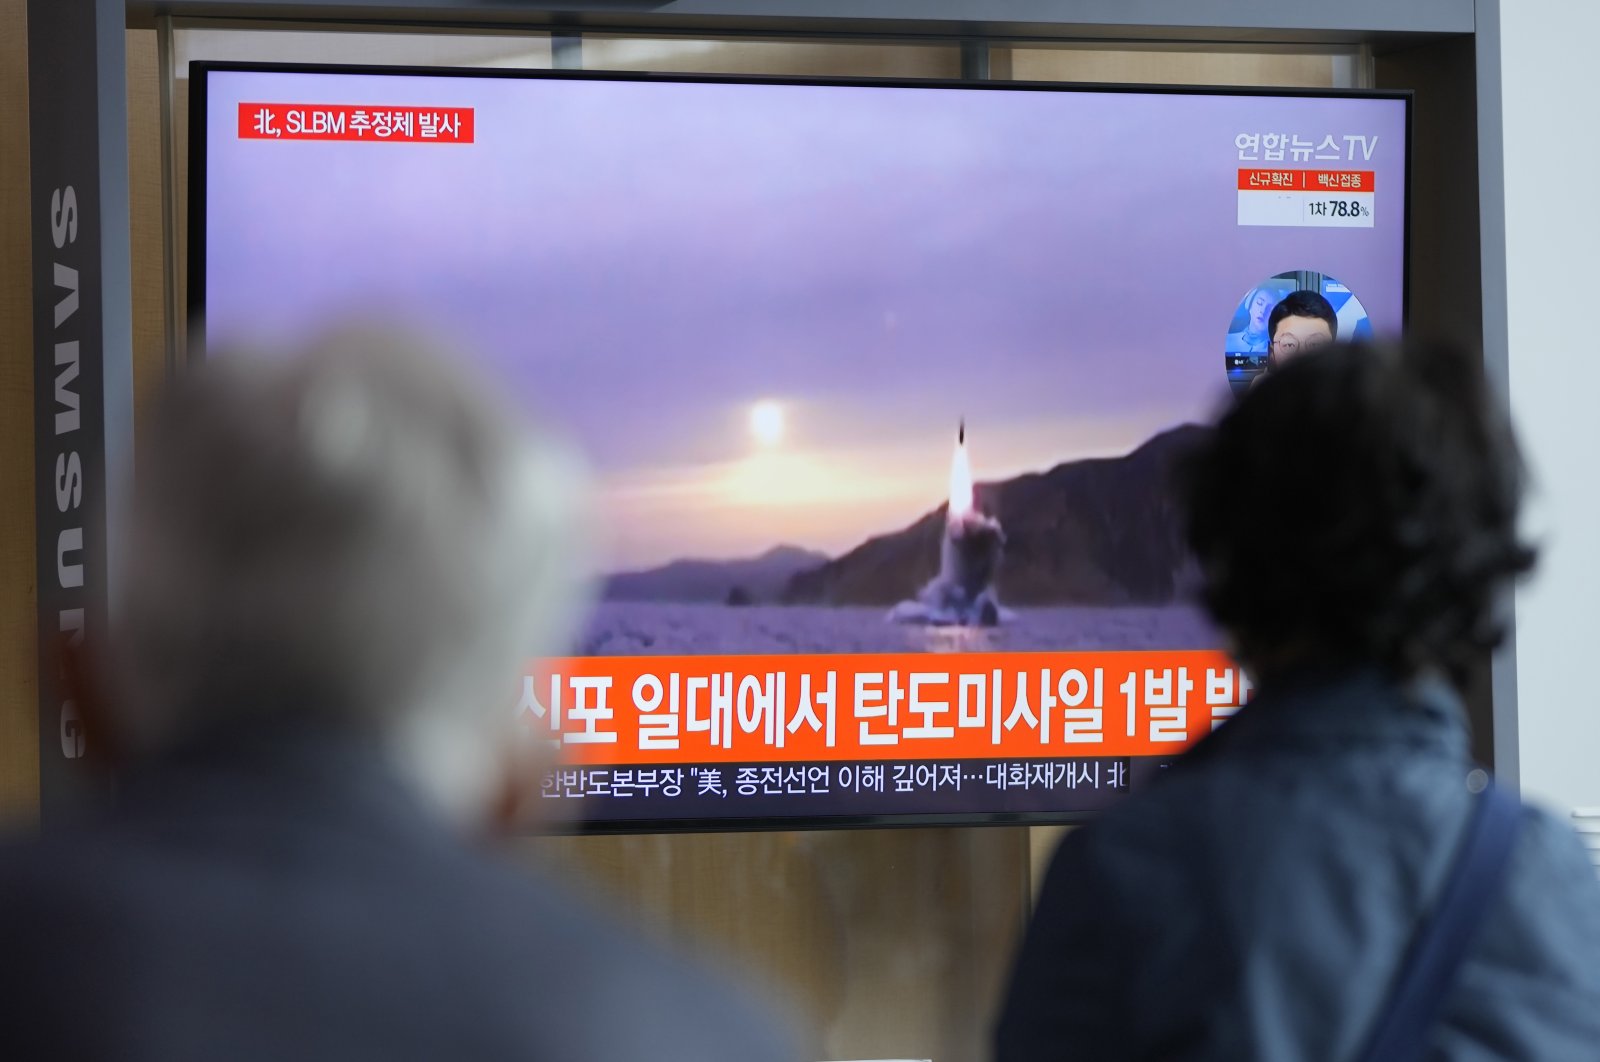 People watch a TV screen showing a news program reporting about North Korea's missile launch with file footage at a train station in Seoul, South Korea, Oct. 19, 2021. (AP Photo)